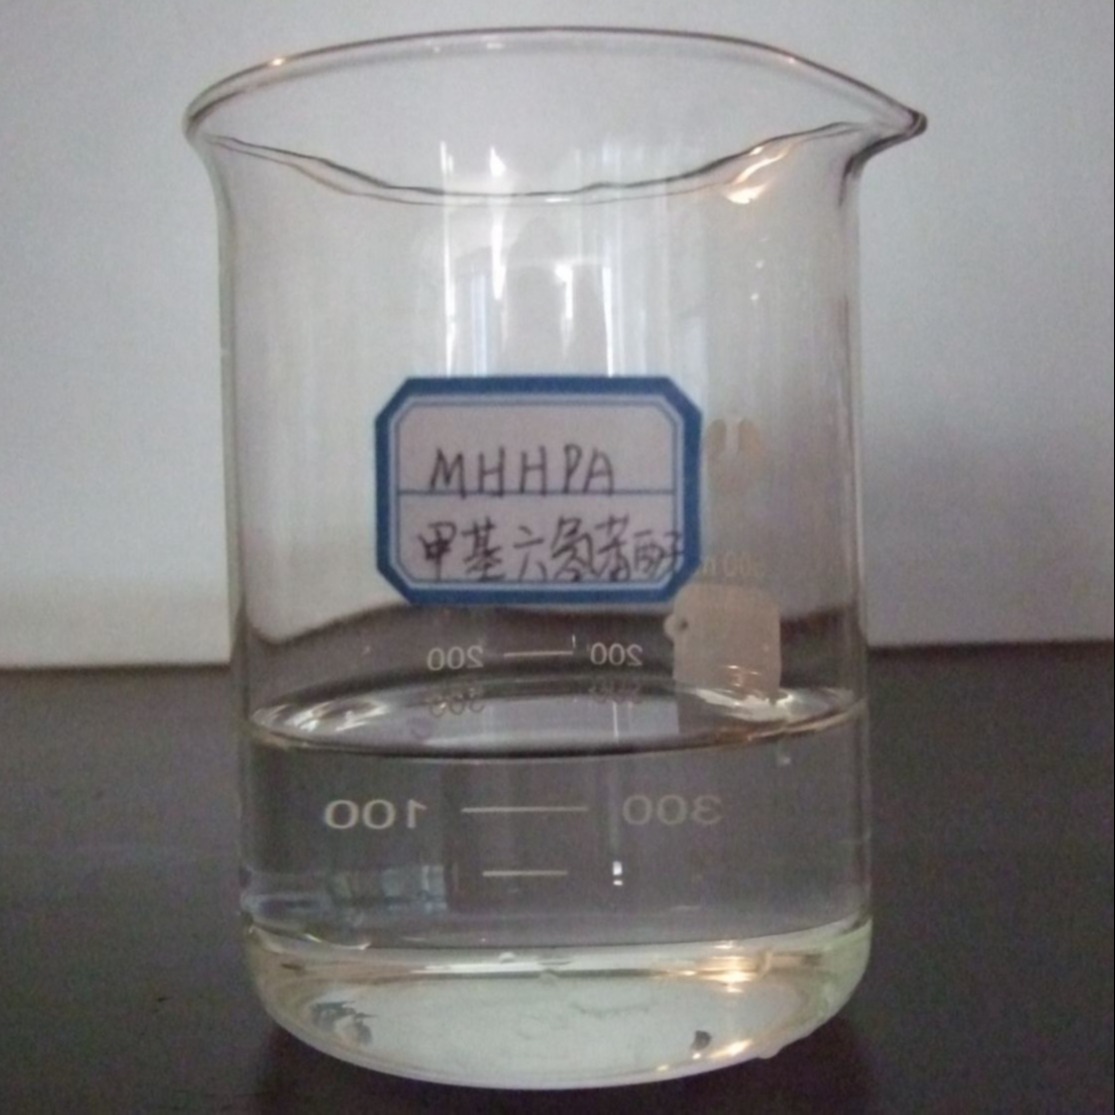 Wholesale Methylhexahydrophthalic anhydride MHHPA CAS NO: 25550-51-0 from china suppliers